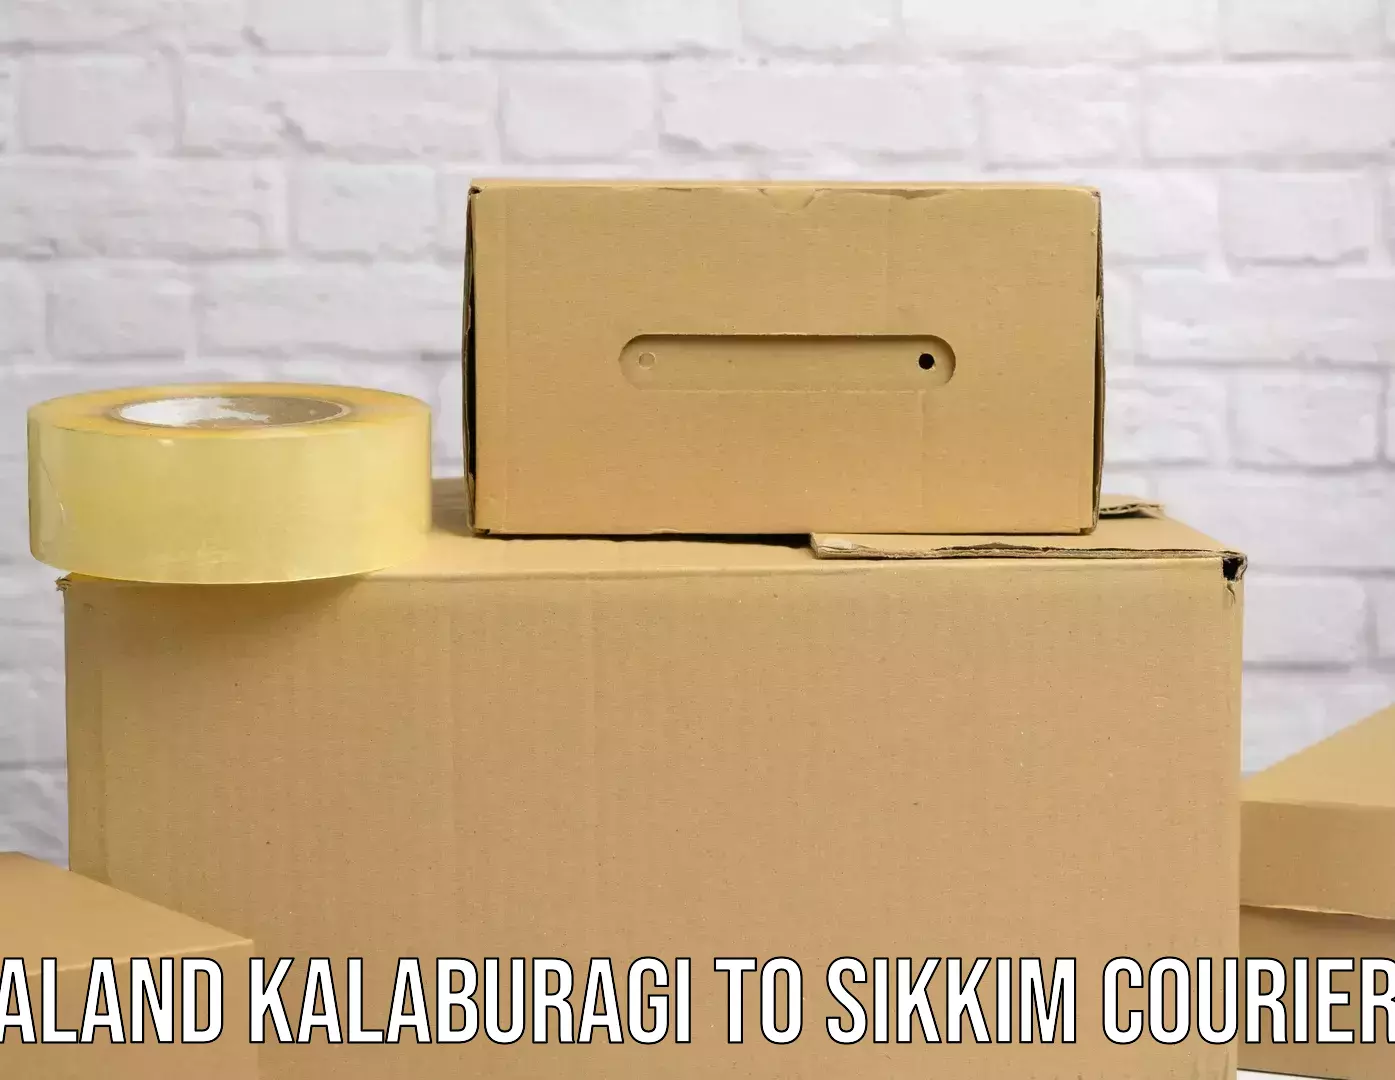 High-quality delivery services Aland Kalaburagi to East Sikkim